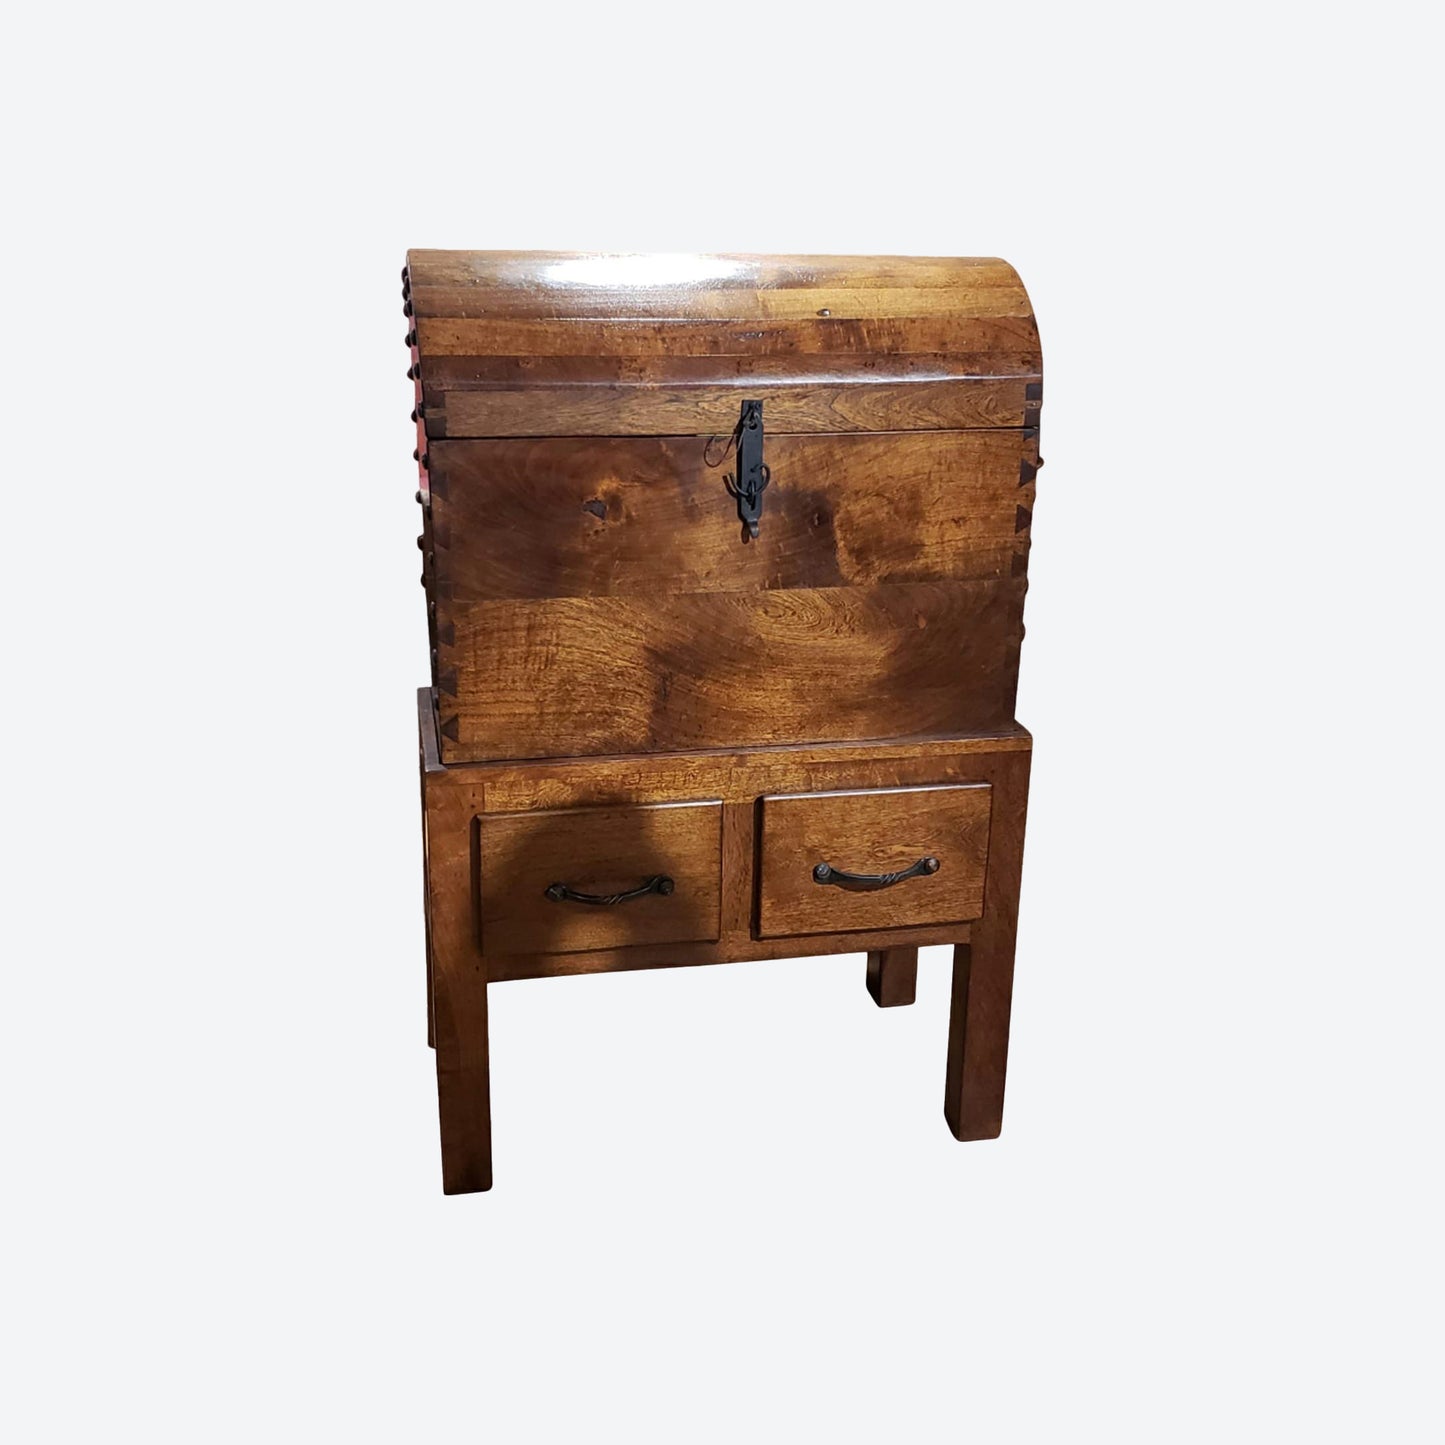 Mesquite   WOOD CHEST CABINET WITH DRAWERS -SK- SKU 1045